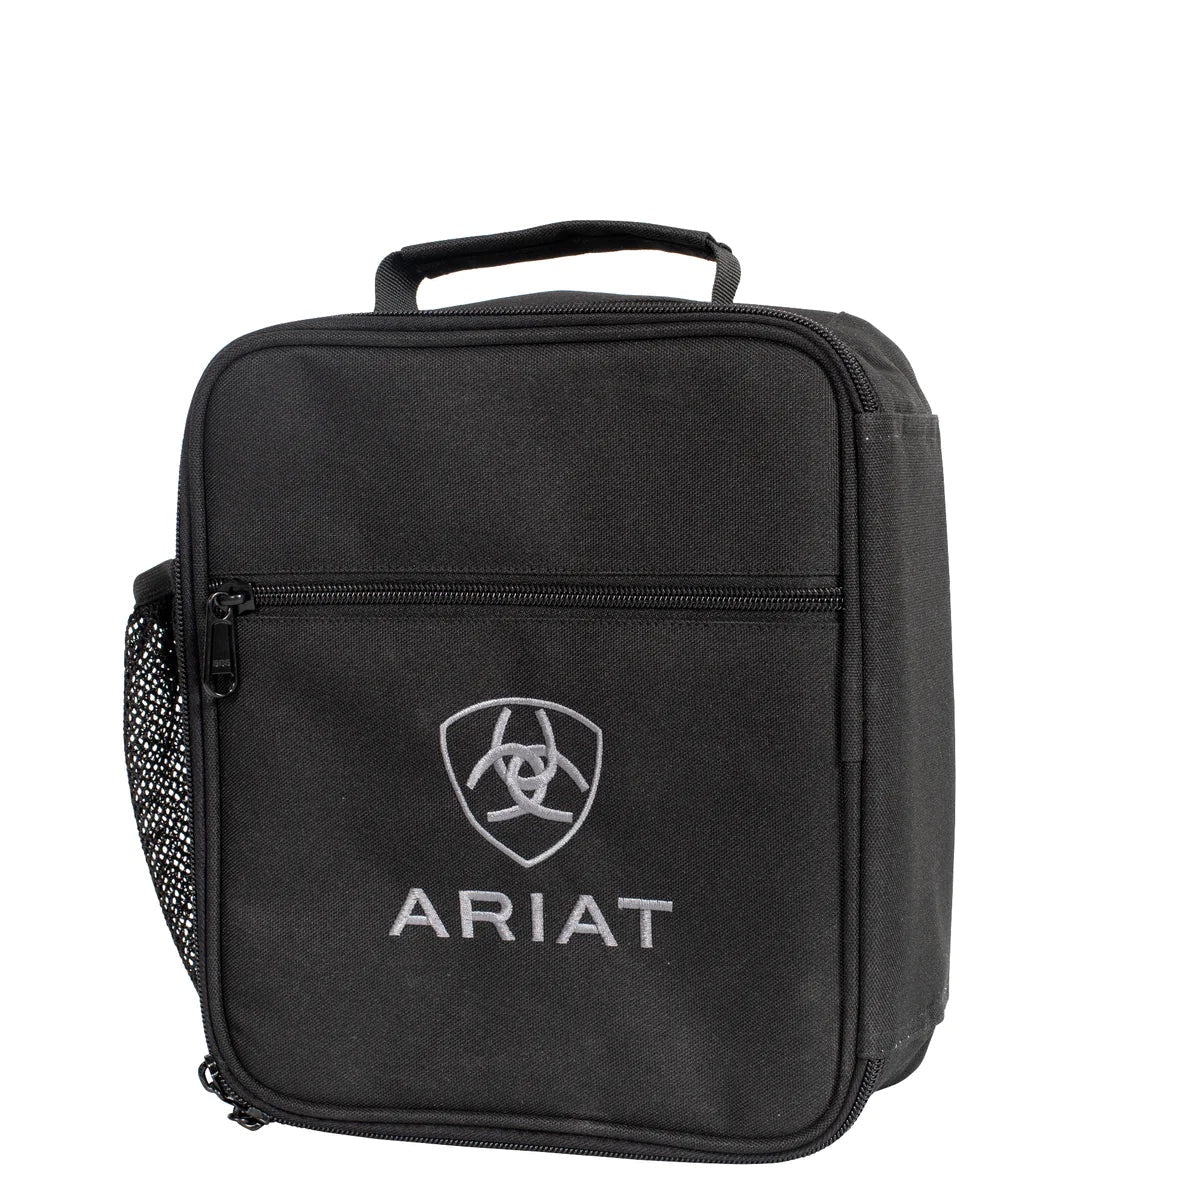 Ariat Lunch Box - Black or Pink (6912245530701)